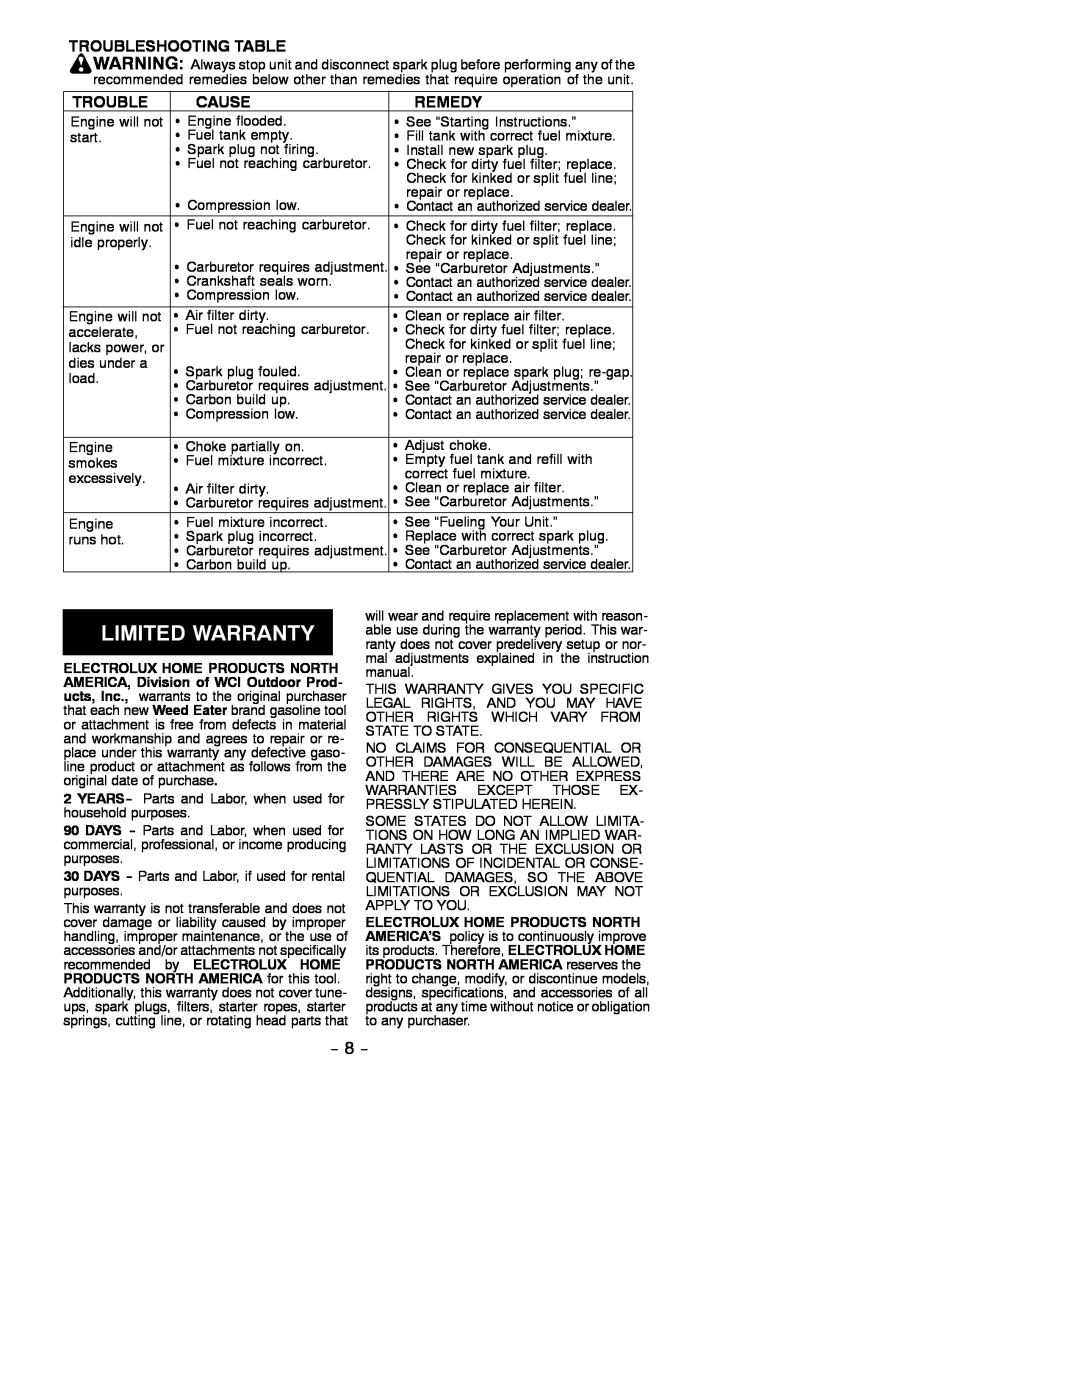 Weed Eater BV1800, 530088071 instruction manual Troubleshooting Table, Cause, Remedy 